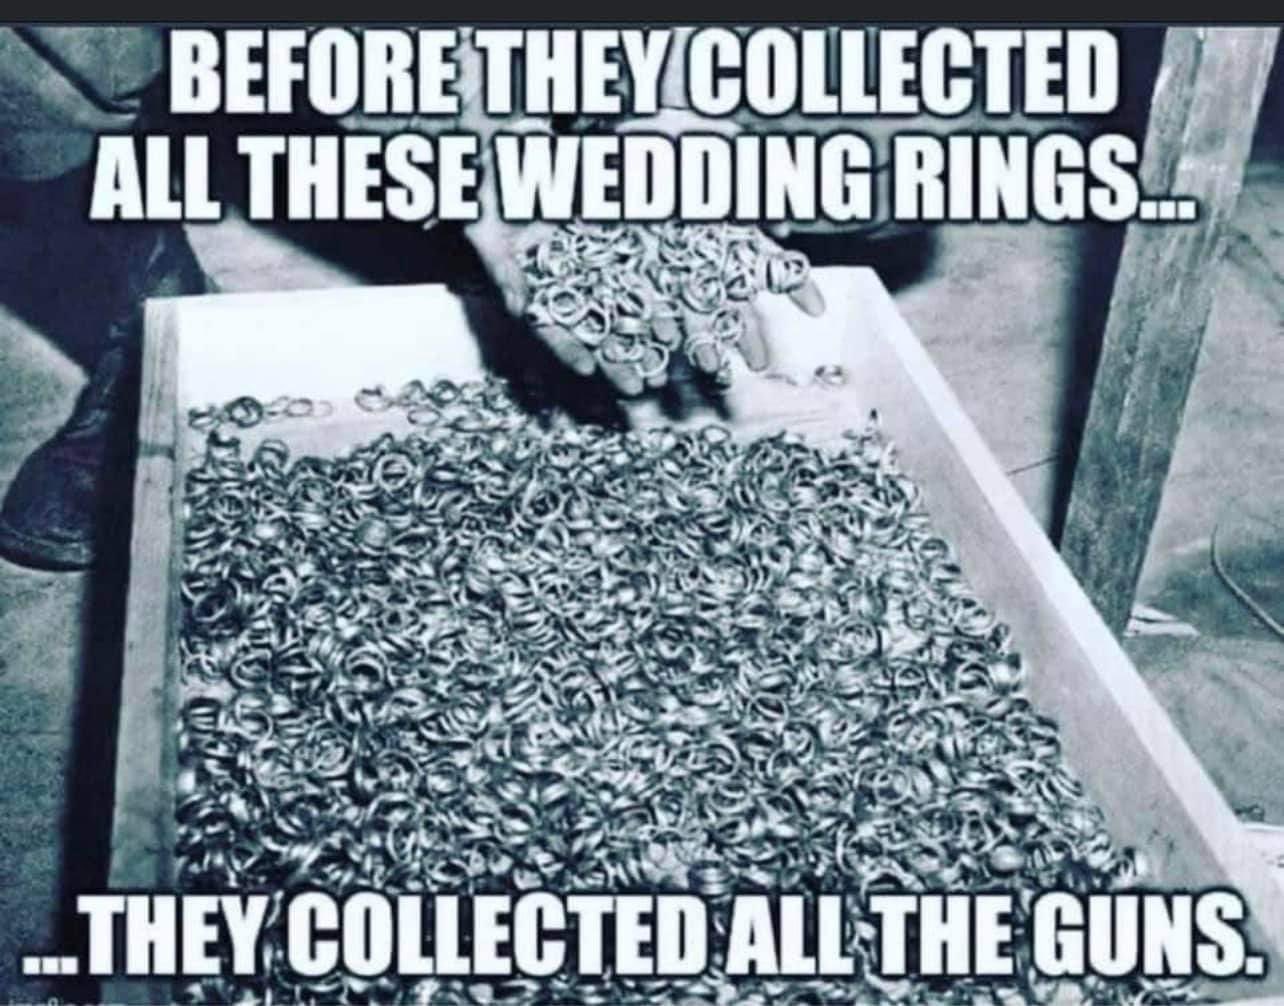 Before They Collected Wedding Rings.jpg